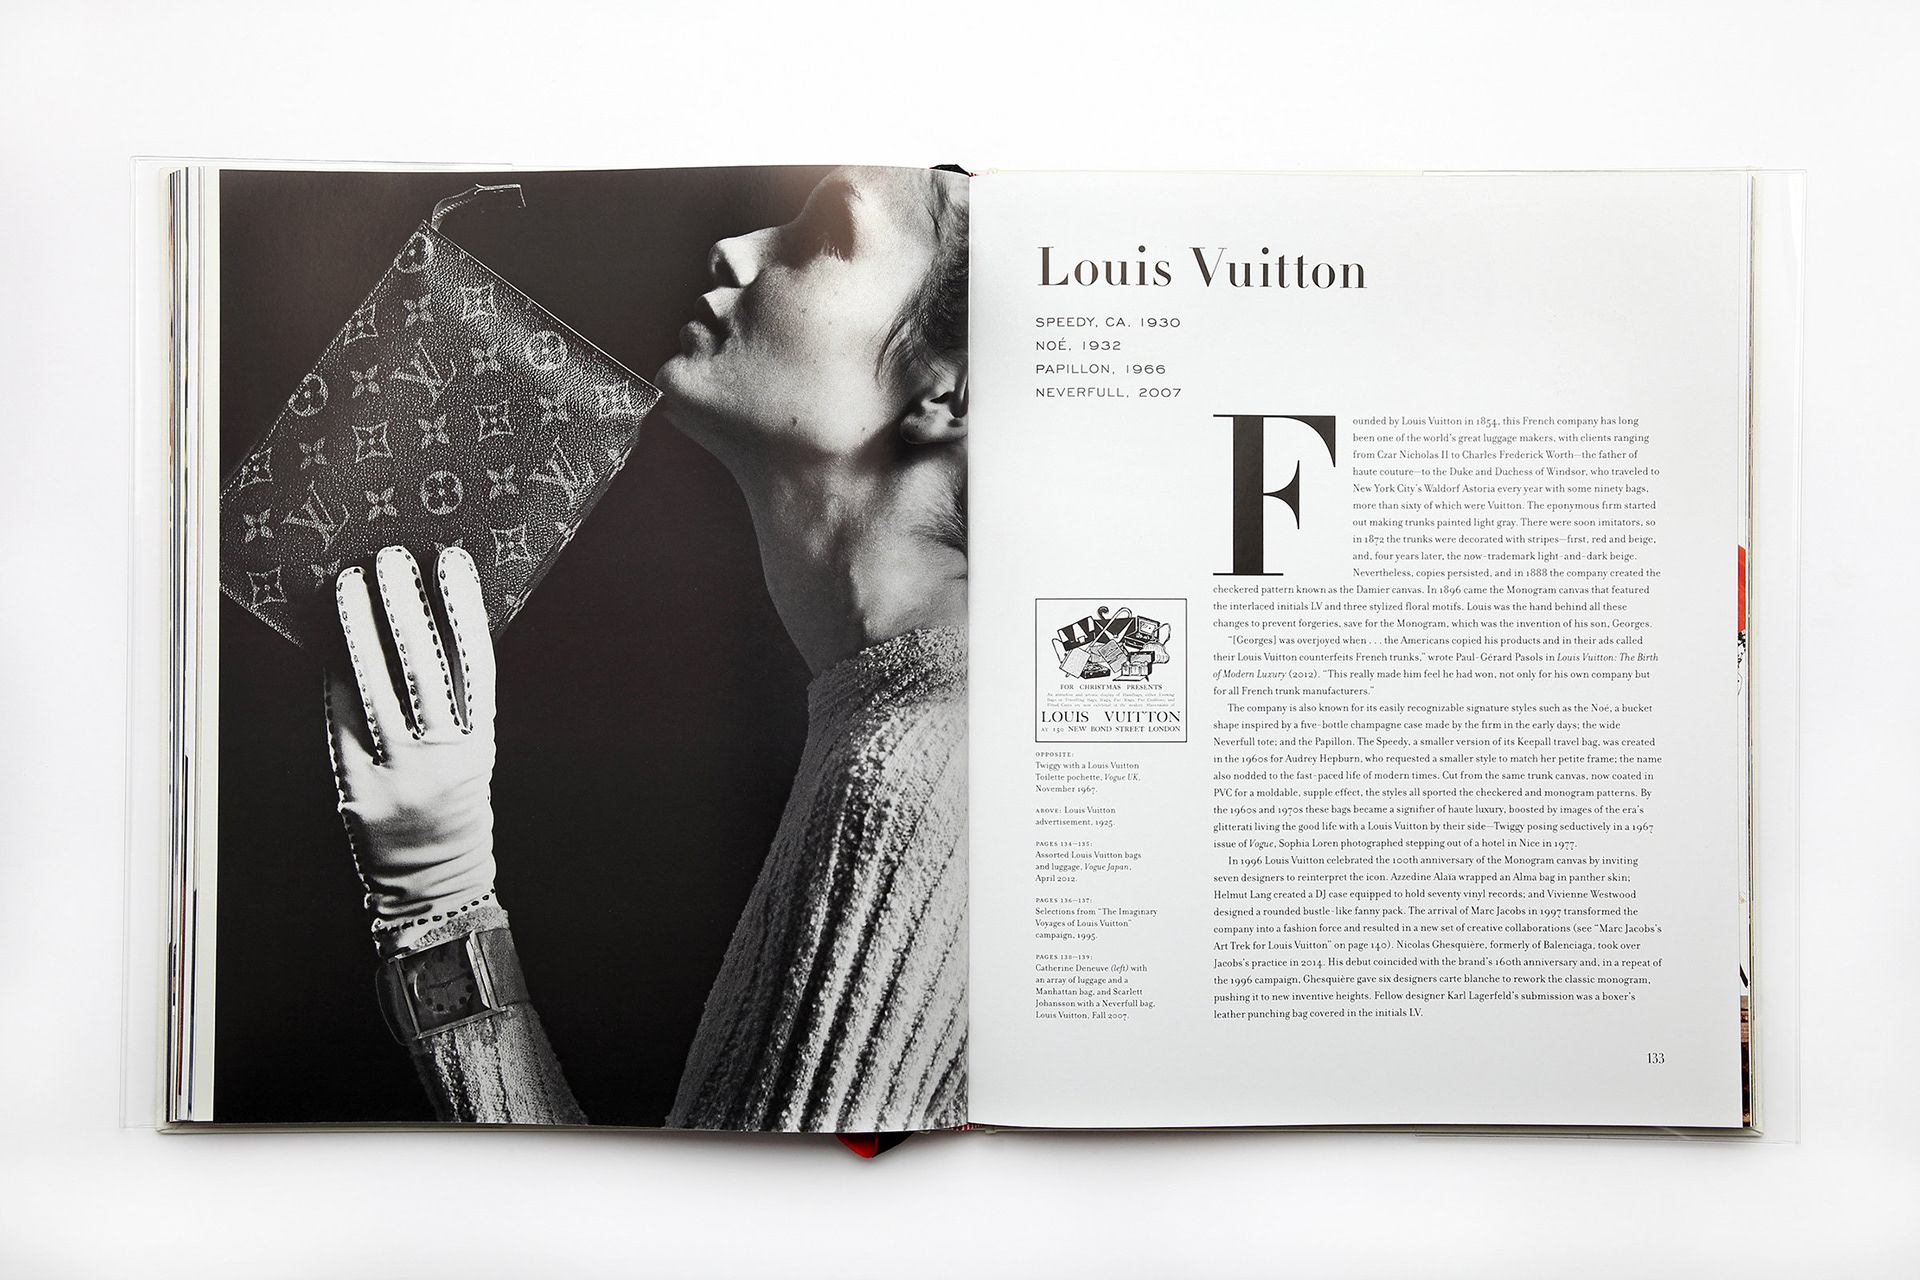 In Lvoe With Louis Vuitton: April 2012